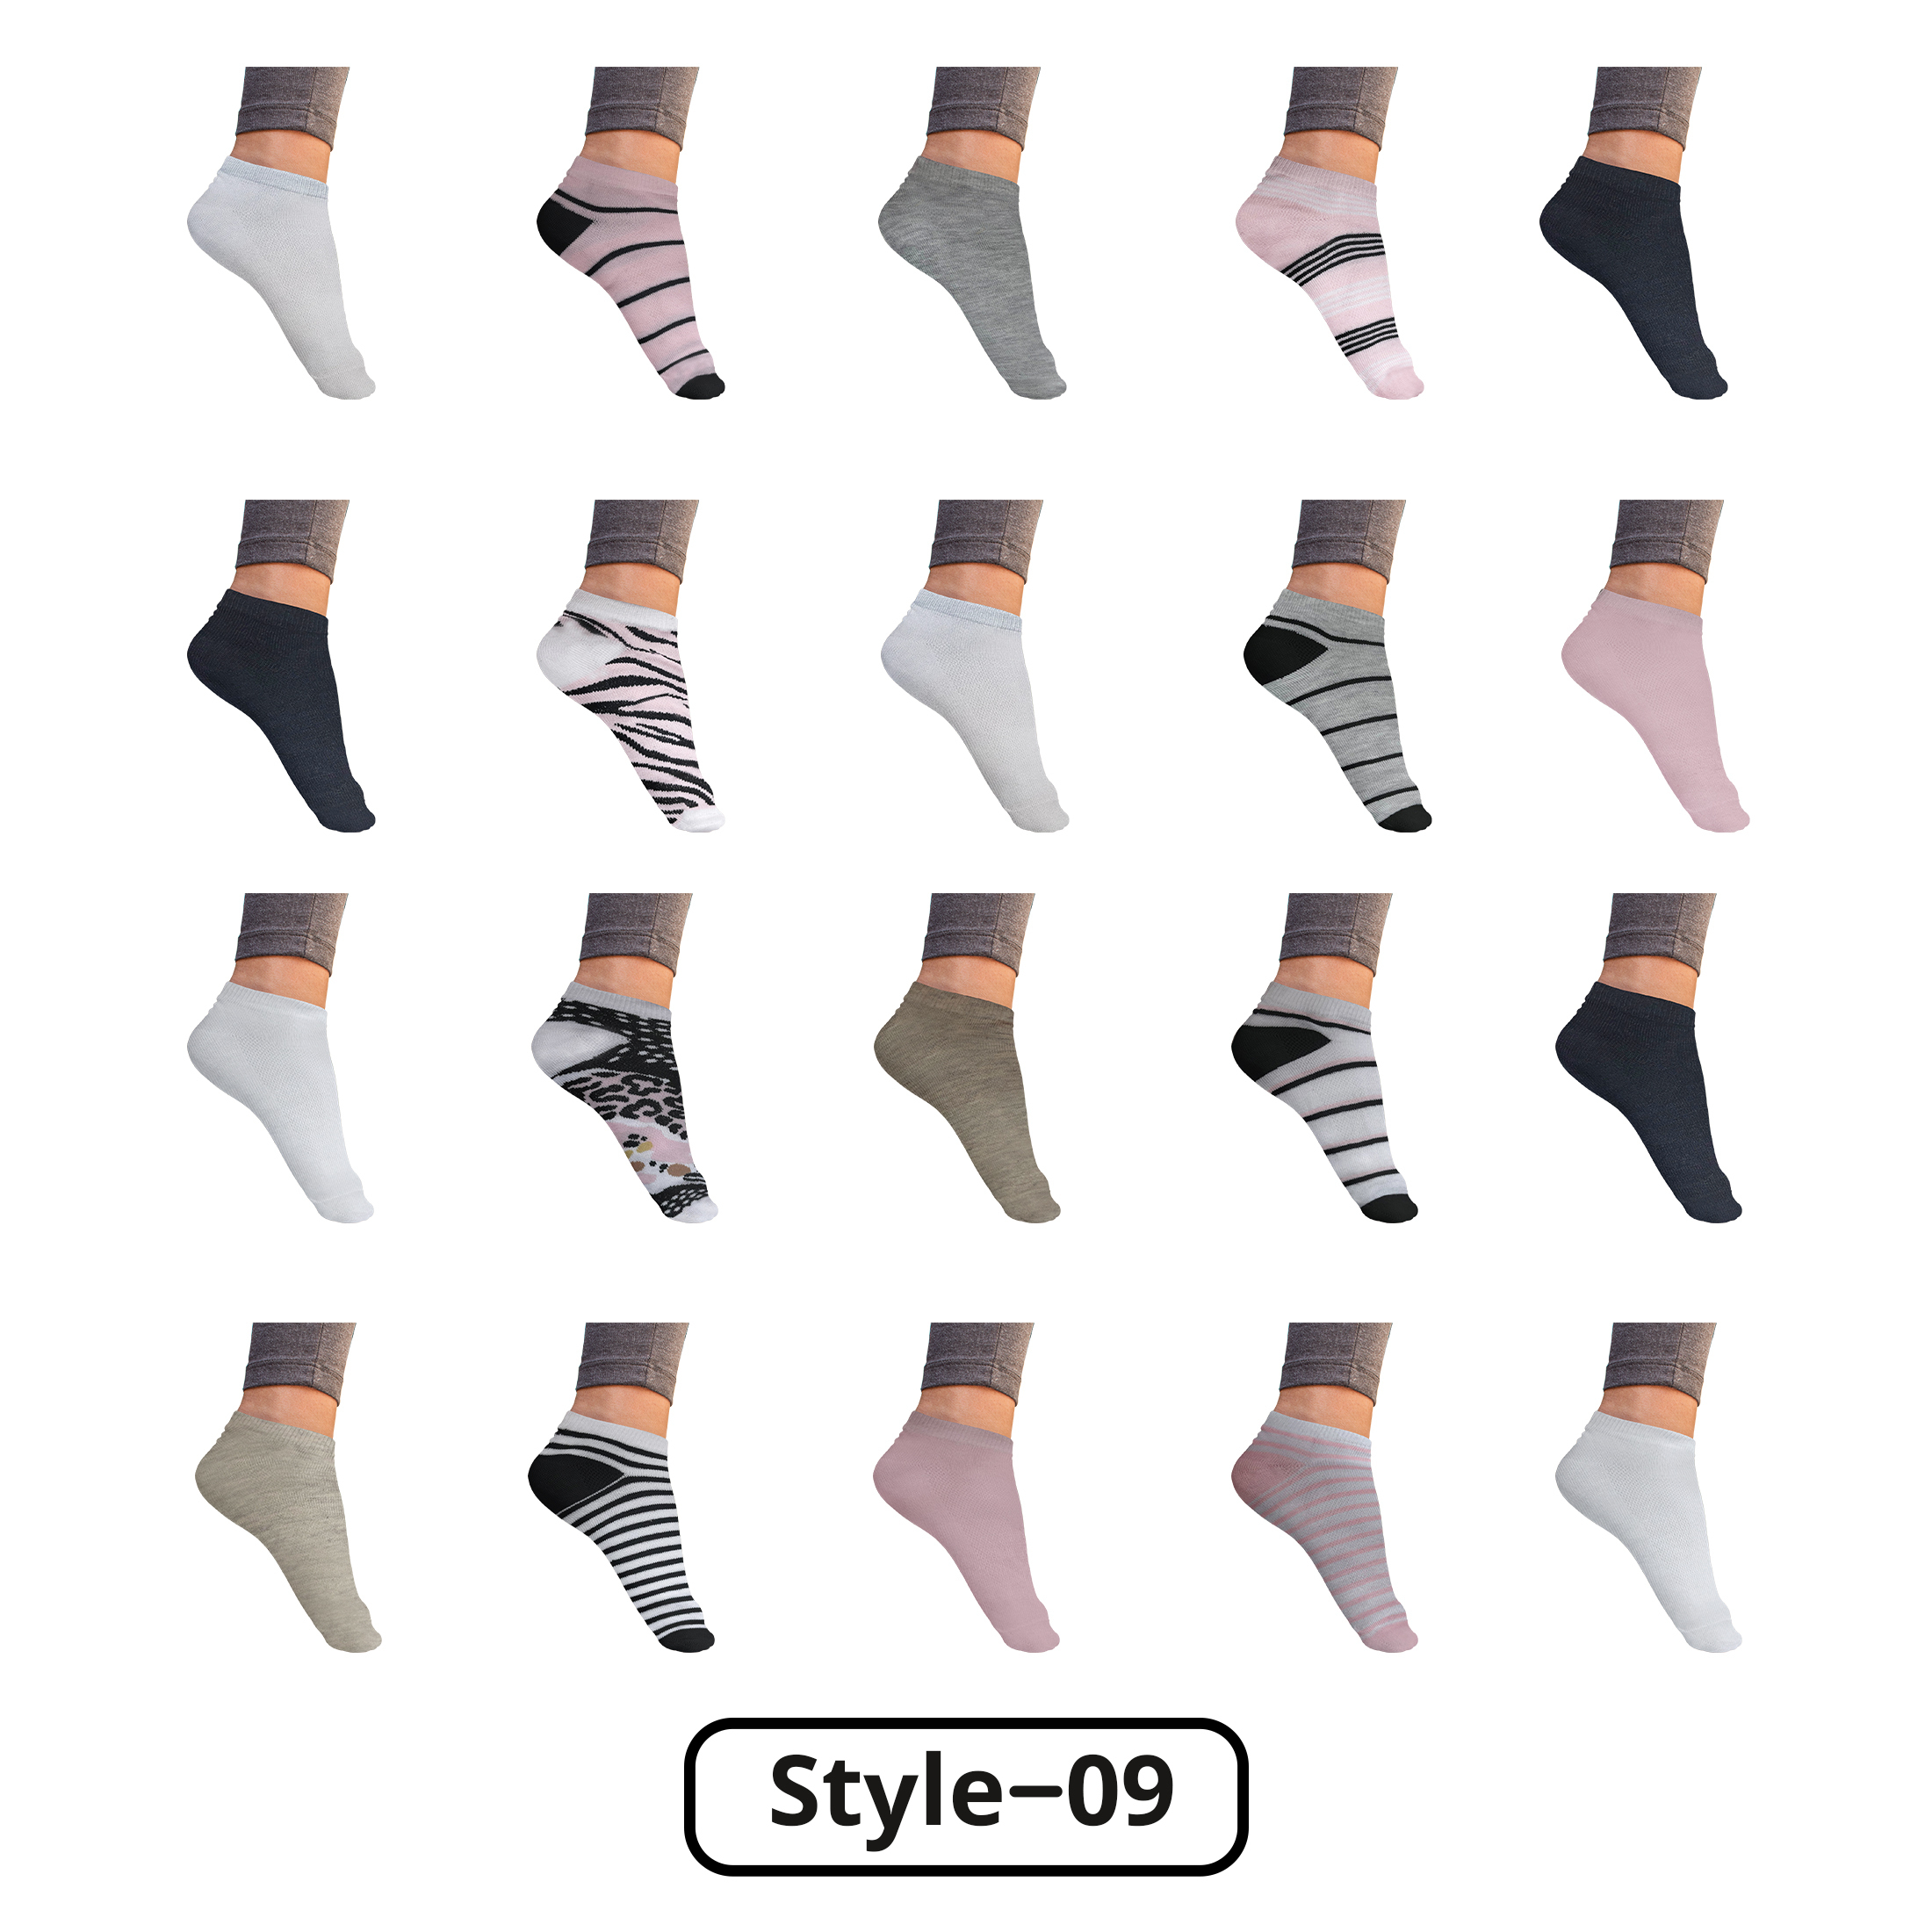 20-Pairs: Women’s Breathable Stylish Colorful Fun No Show Low Cut Ankle Socks - Style 9